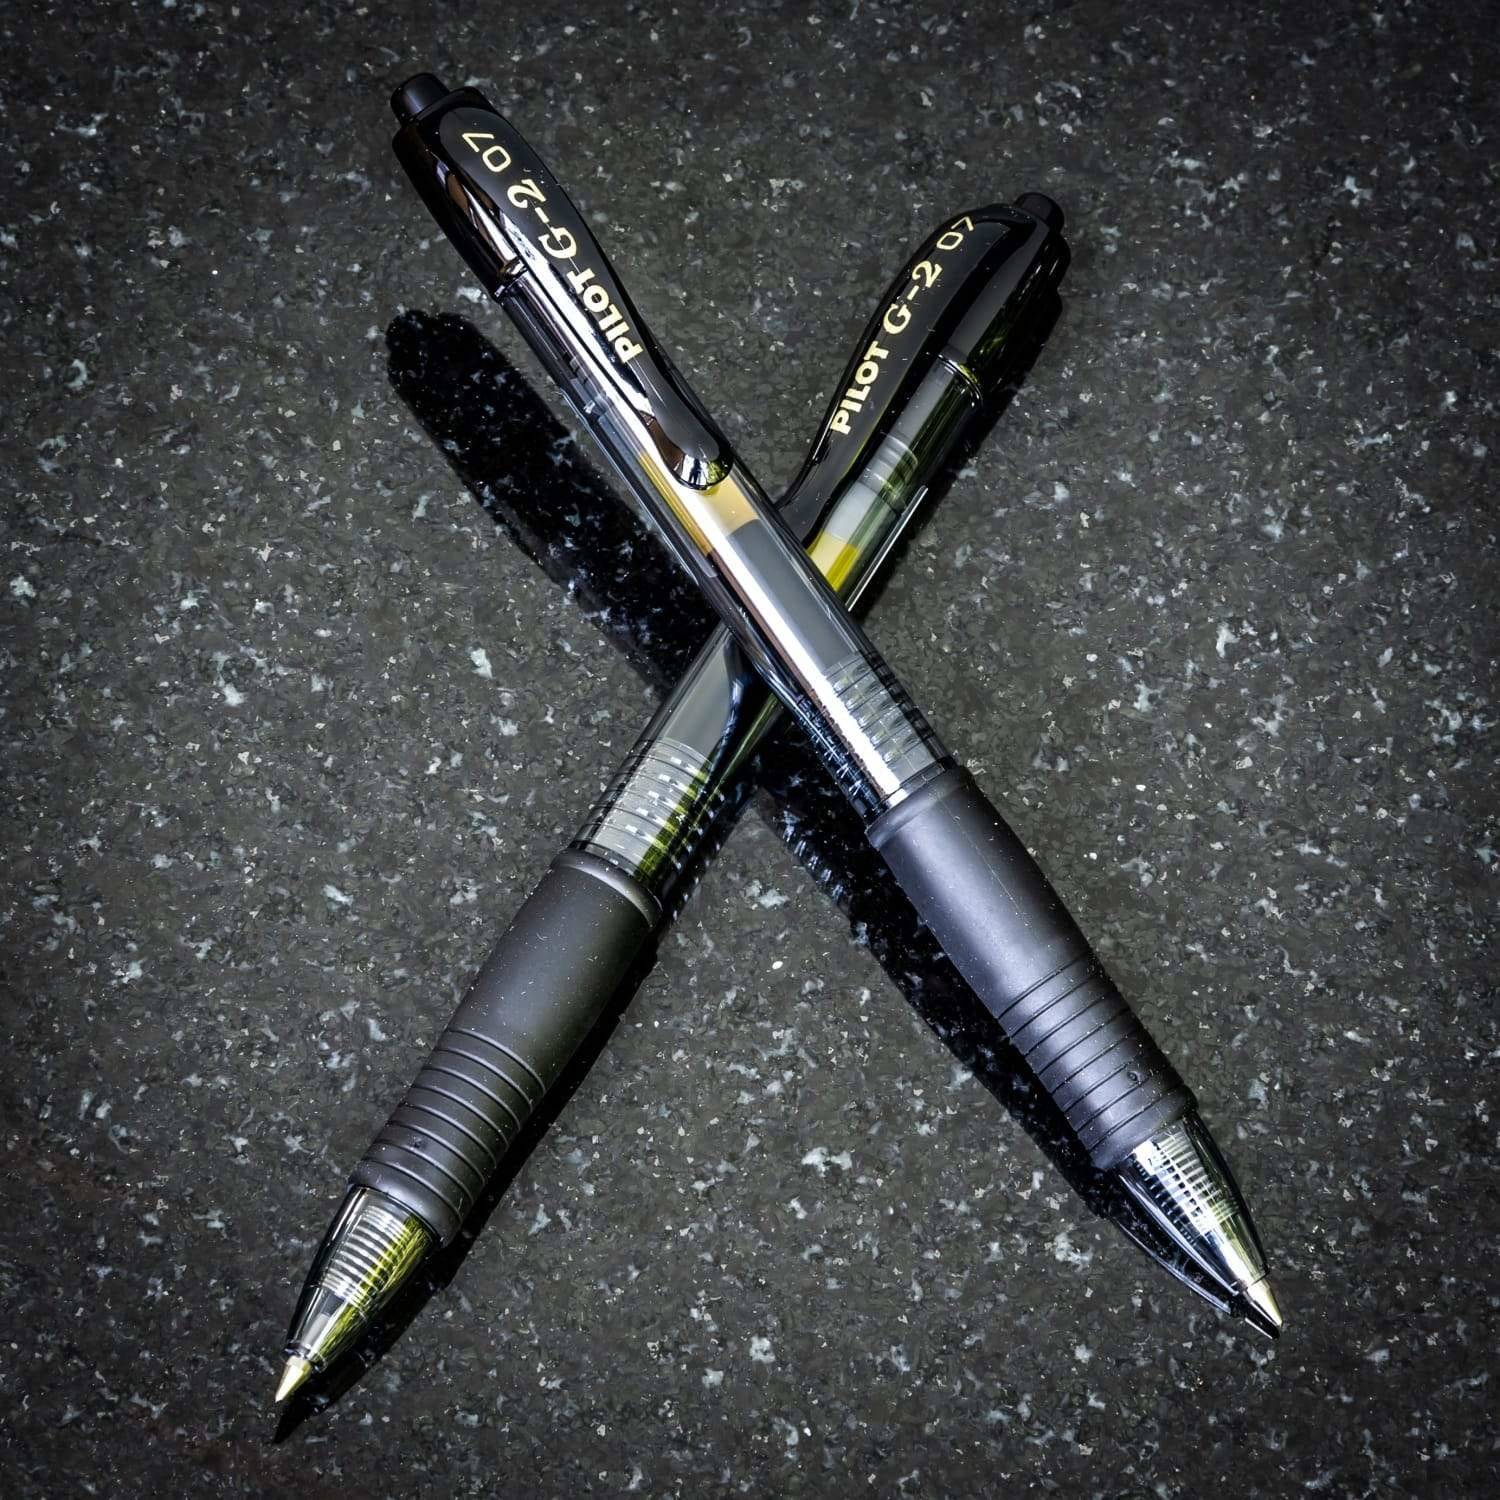 Two Pilot G2 Retractable Good Pens For Note Taking